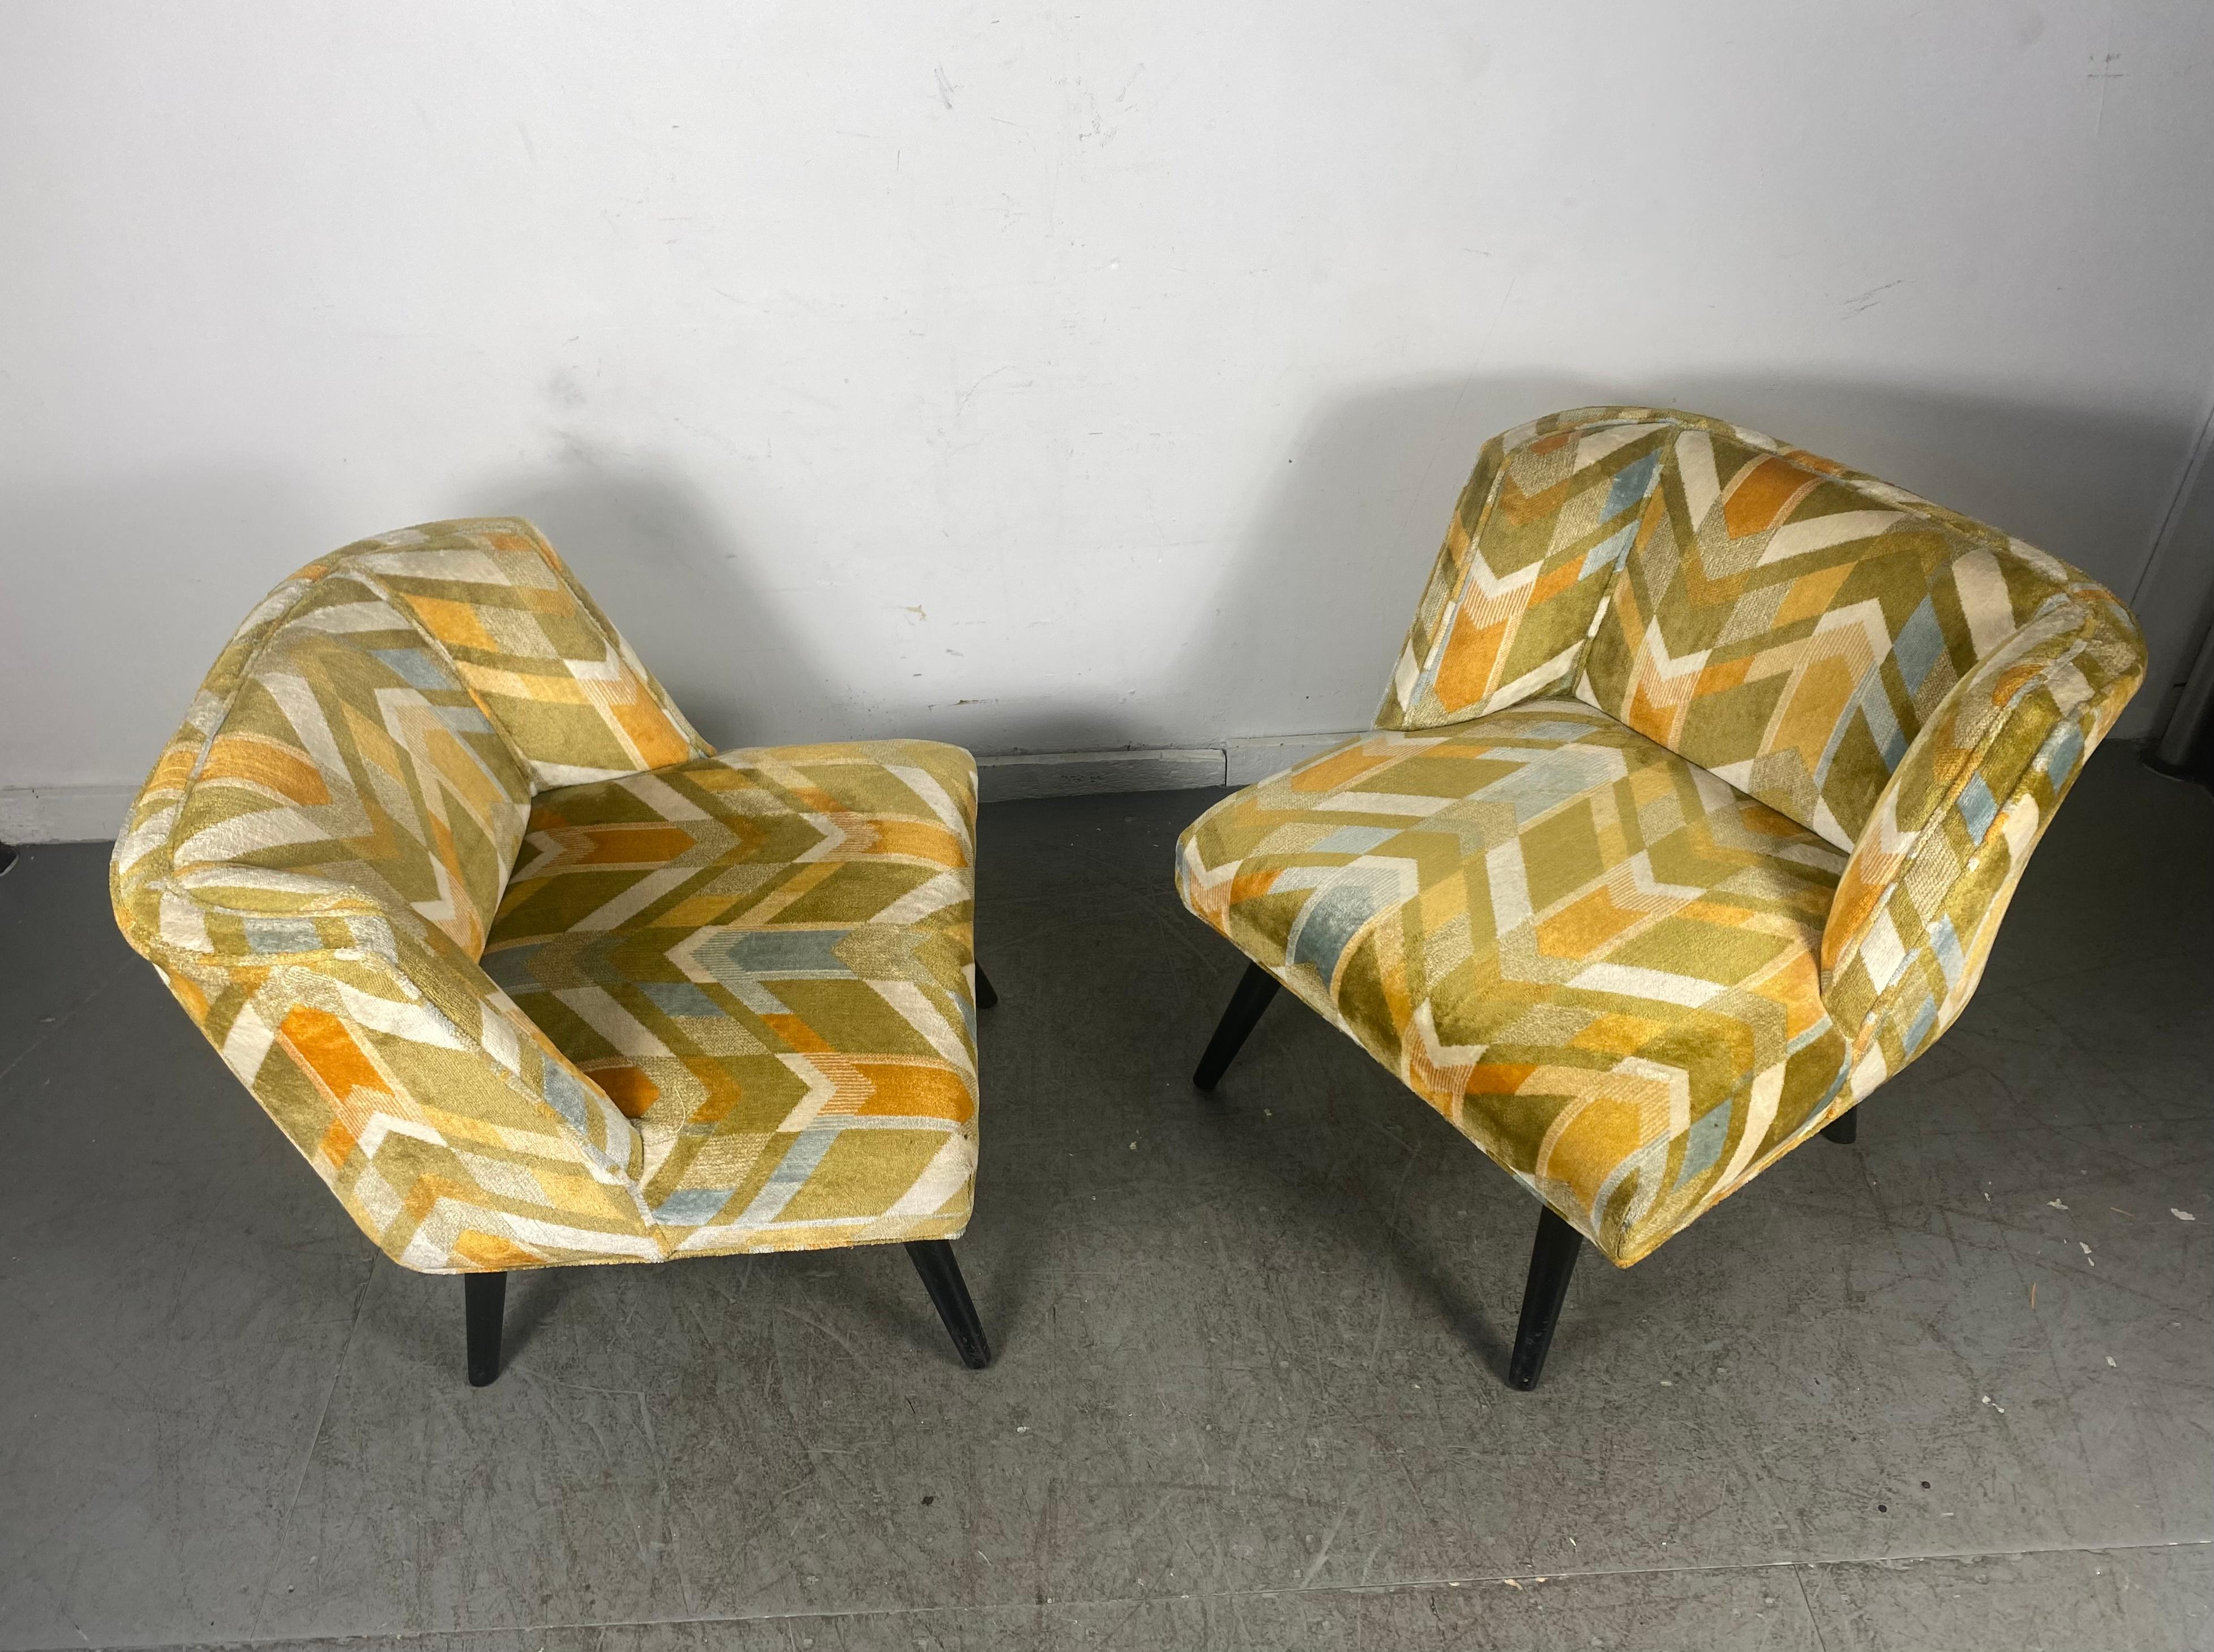 Pair Modernist Lounge Chairs, California Modern Manner of James Mont 1